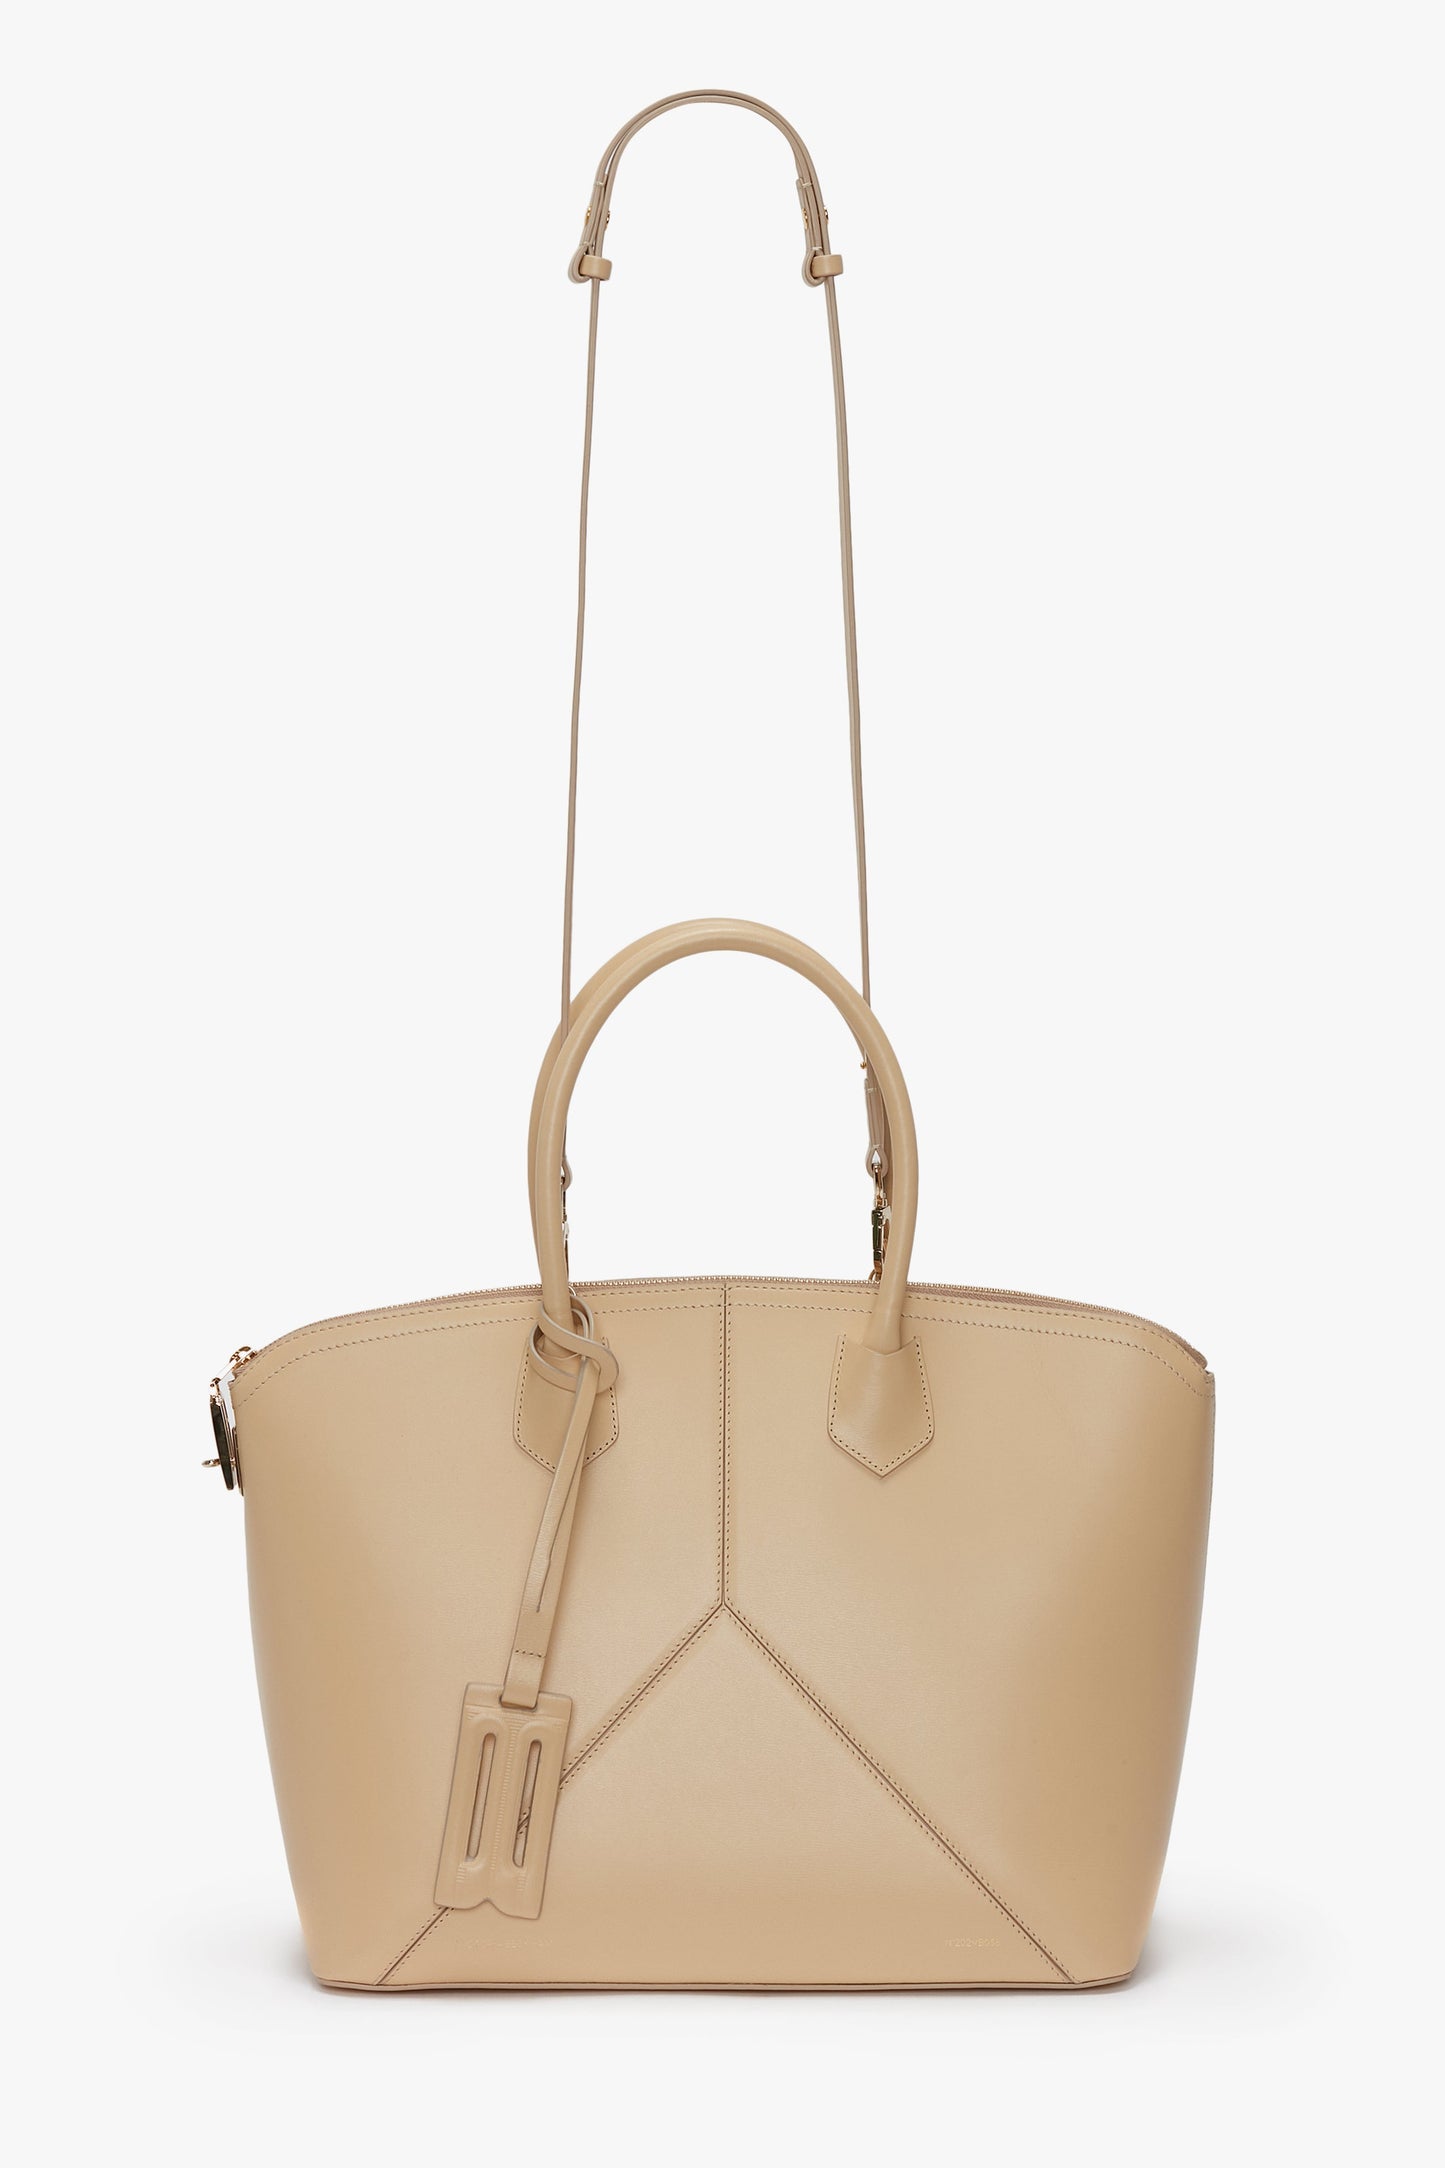 The Victoria Bag In Sesame Leather by Victoria Beckham is a beige leather handbag featuring leather panels, two short handles, and a decorative tag attached. It comes with a long adjustable strap and showcases a subtle geometric design on the front.